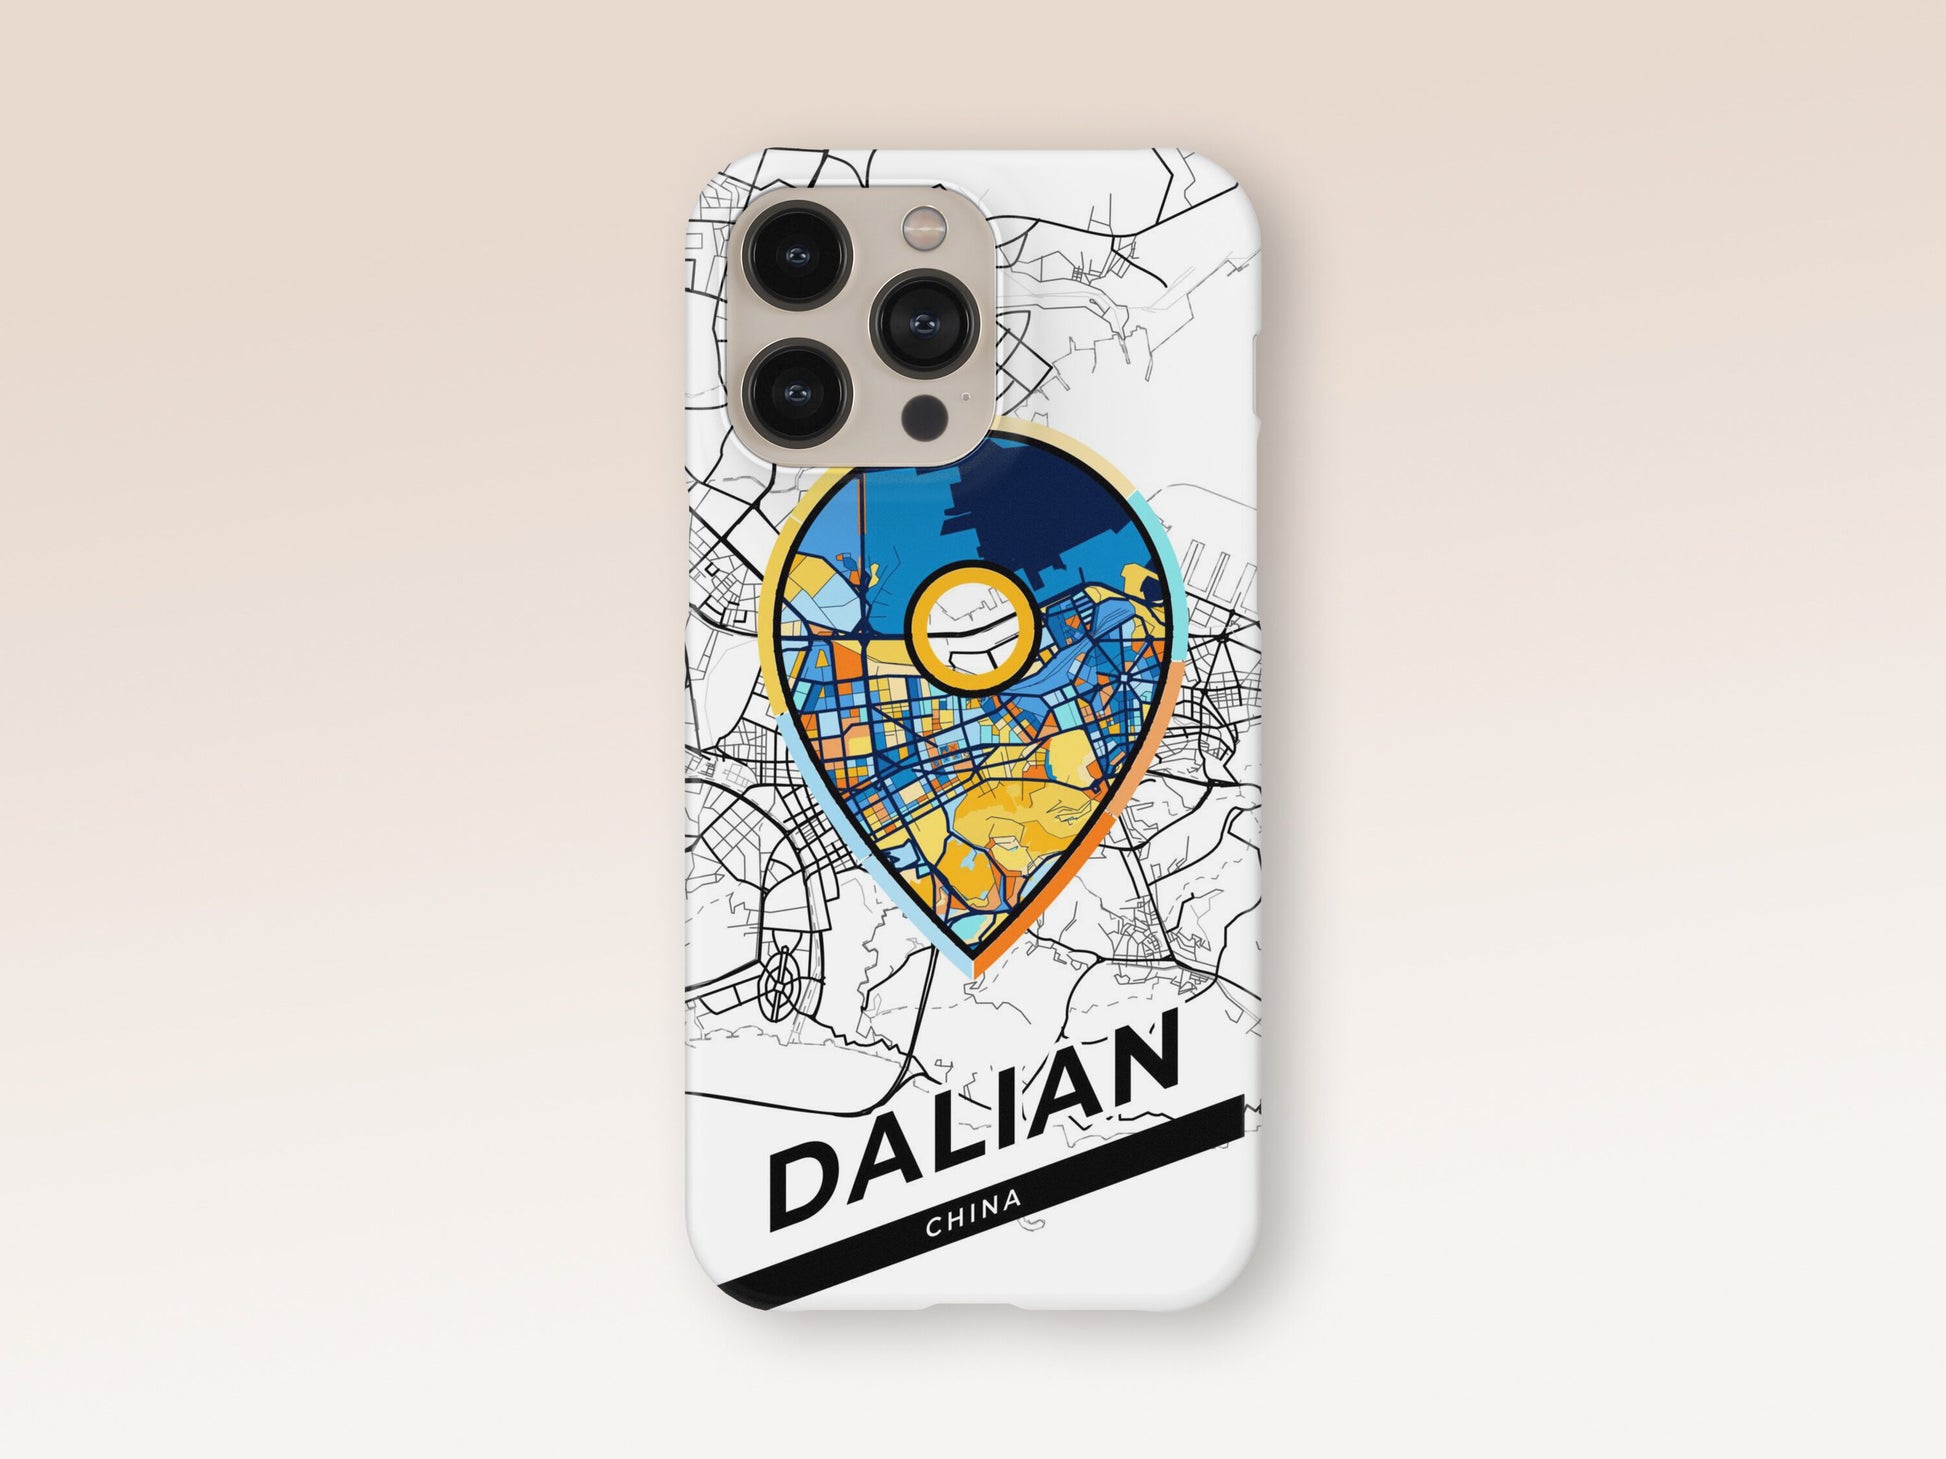 Dalian China slim phone case with colorful icon. Birthday, wedding or housewarming gift. Couple match cases. 1